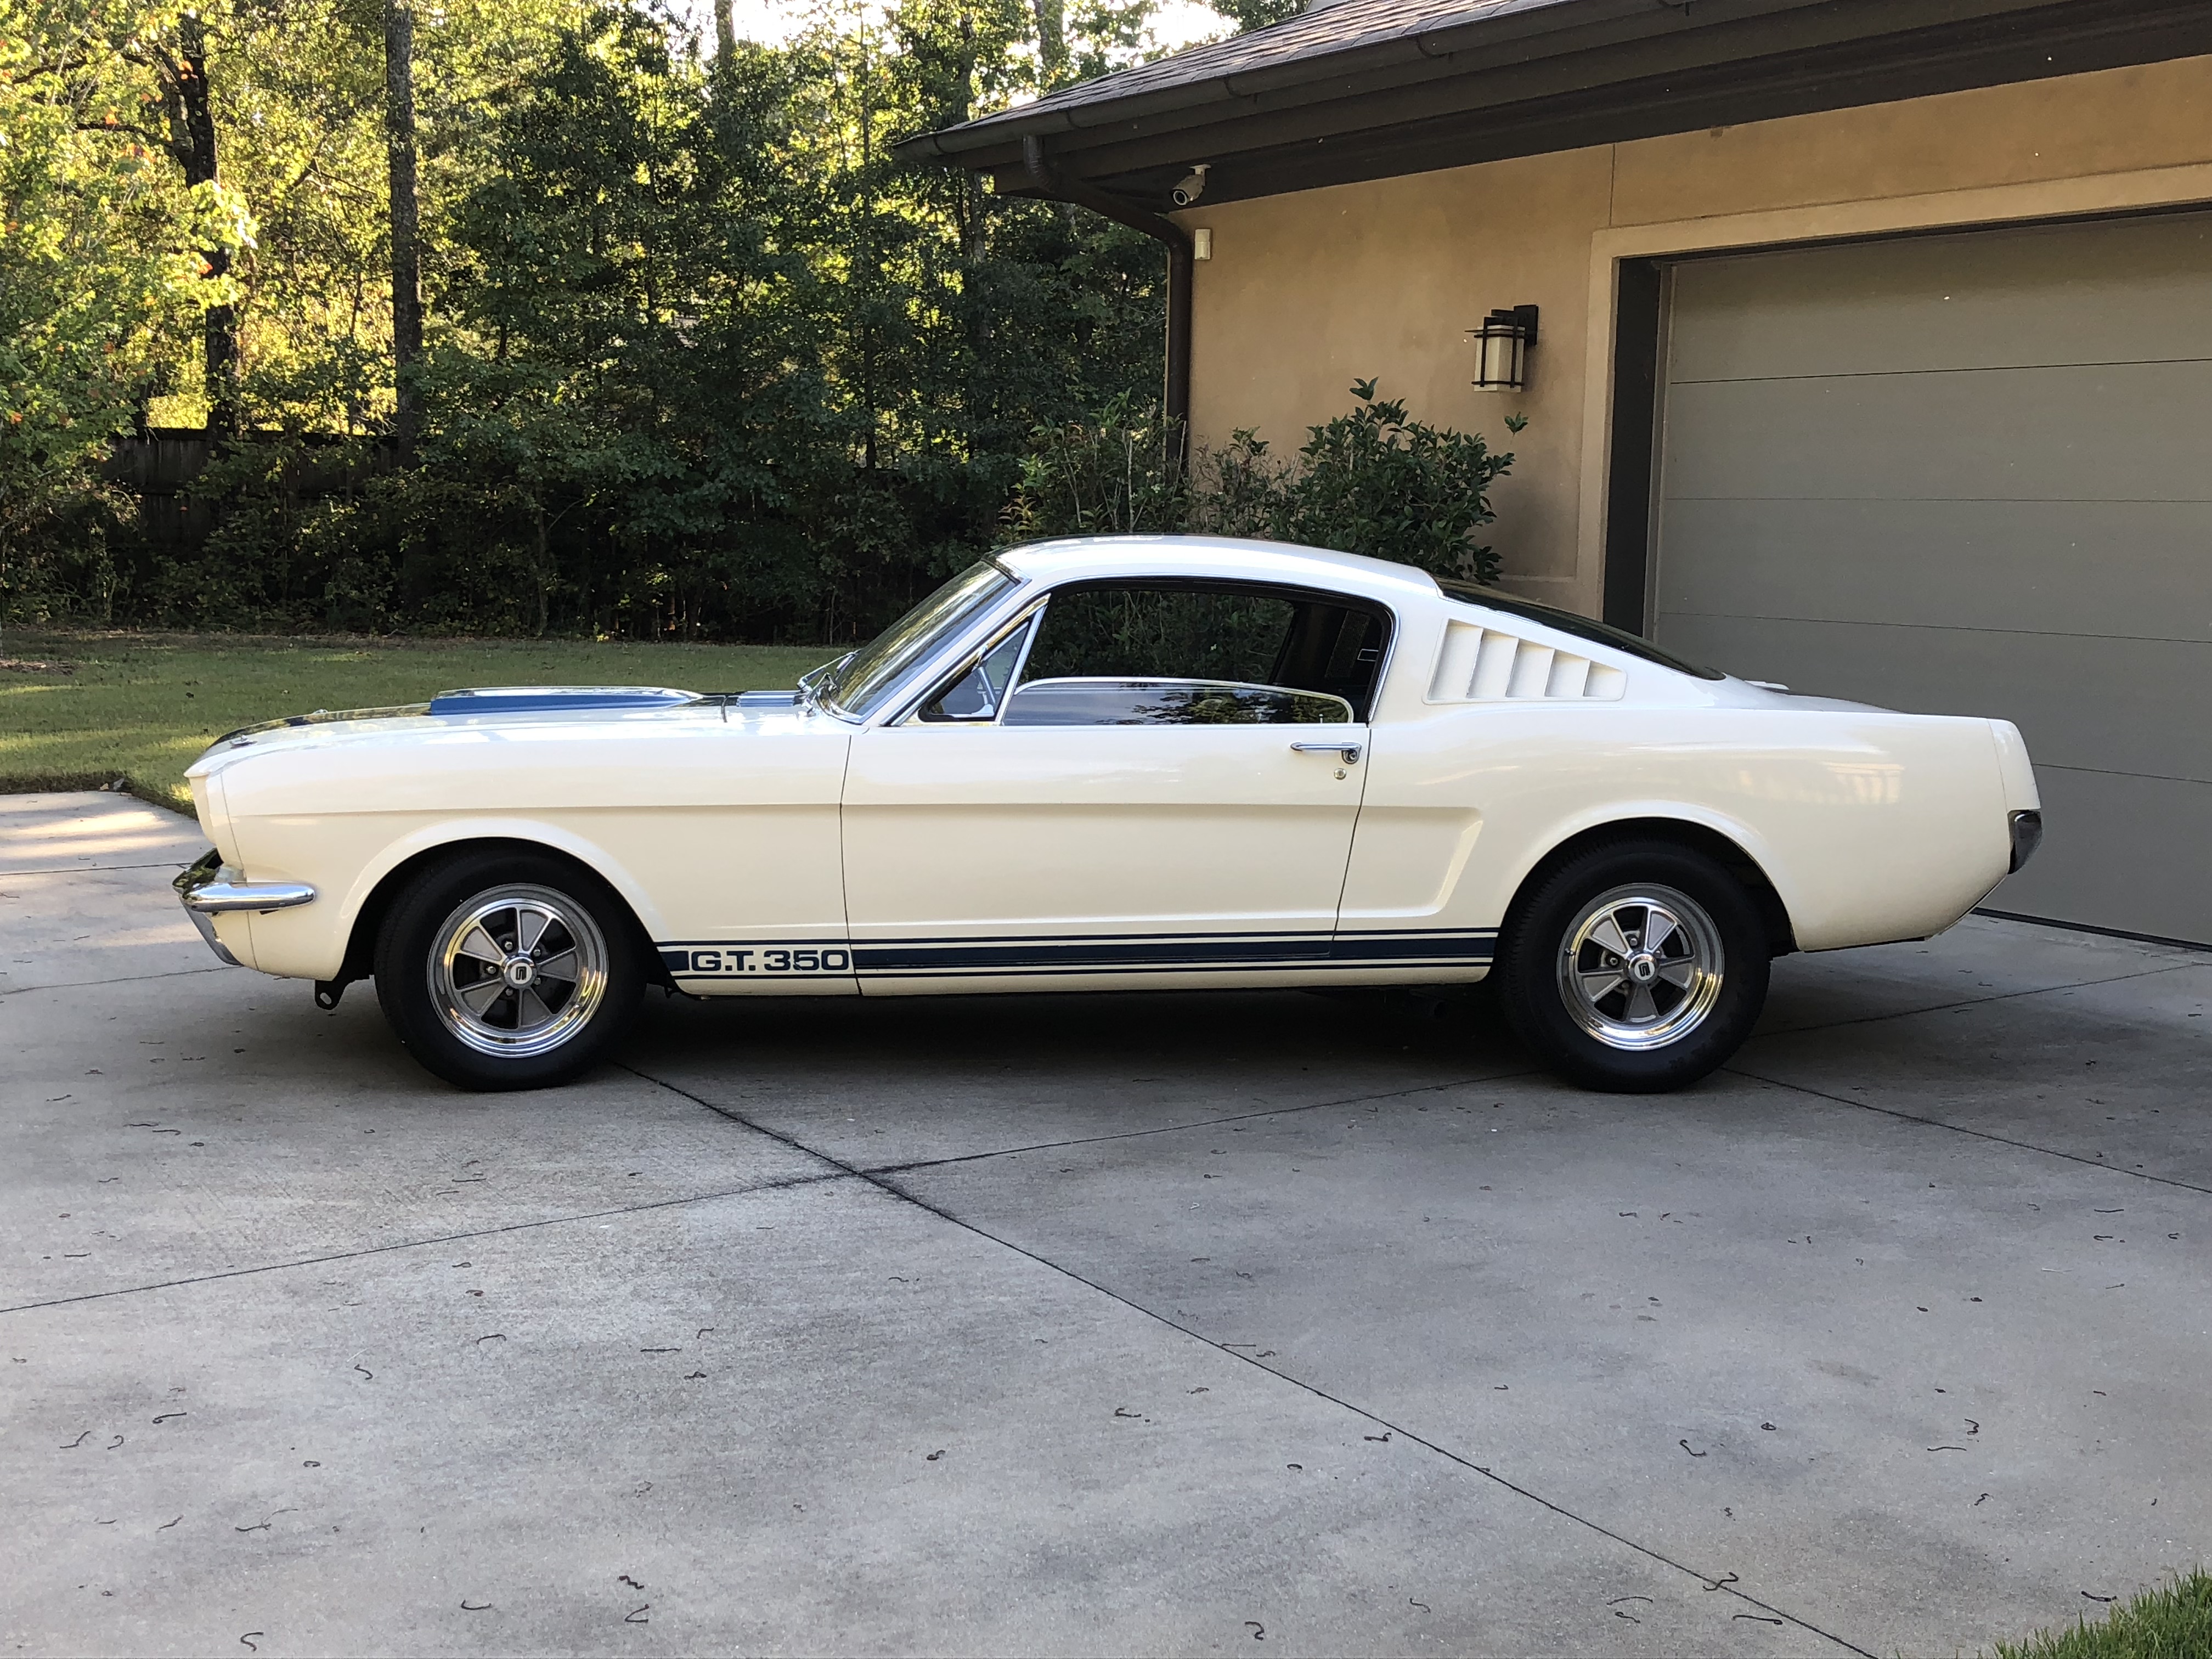 Car Fastback Muscle Car Shelby Mustang Gt350 White Car 4032x3024